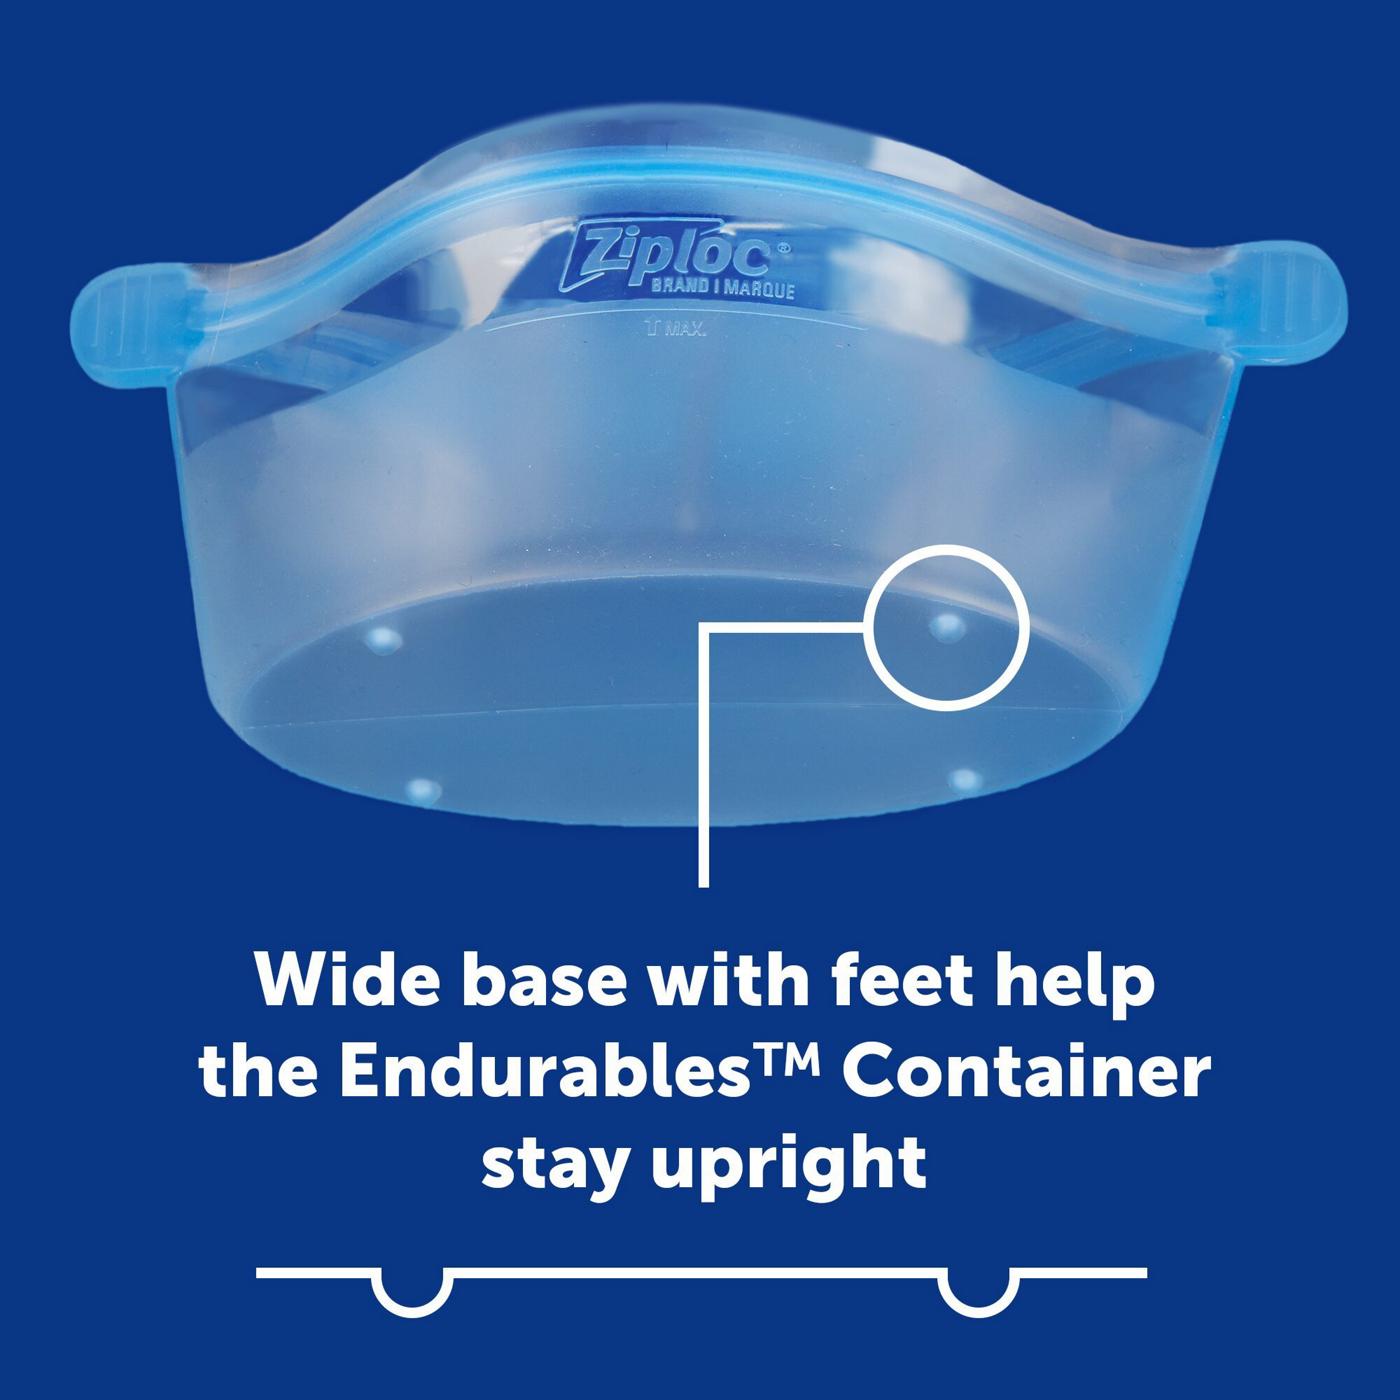 Ziploc Endurables Silicone Container - Small; image 14 of 15